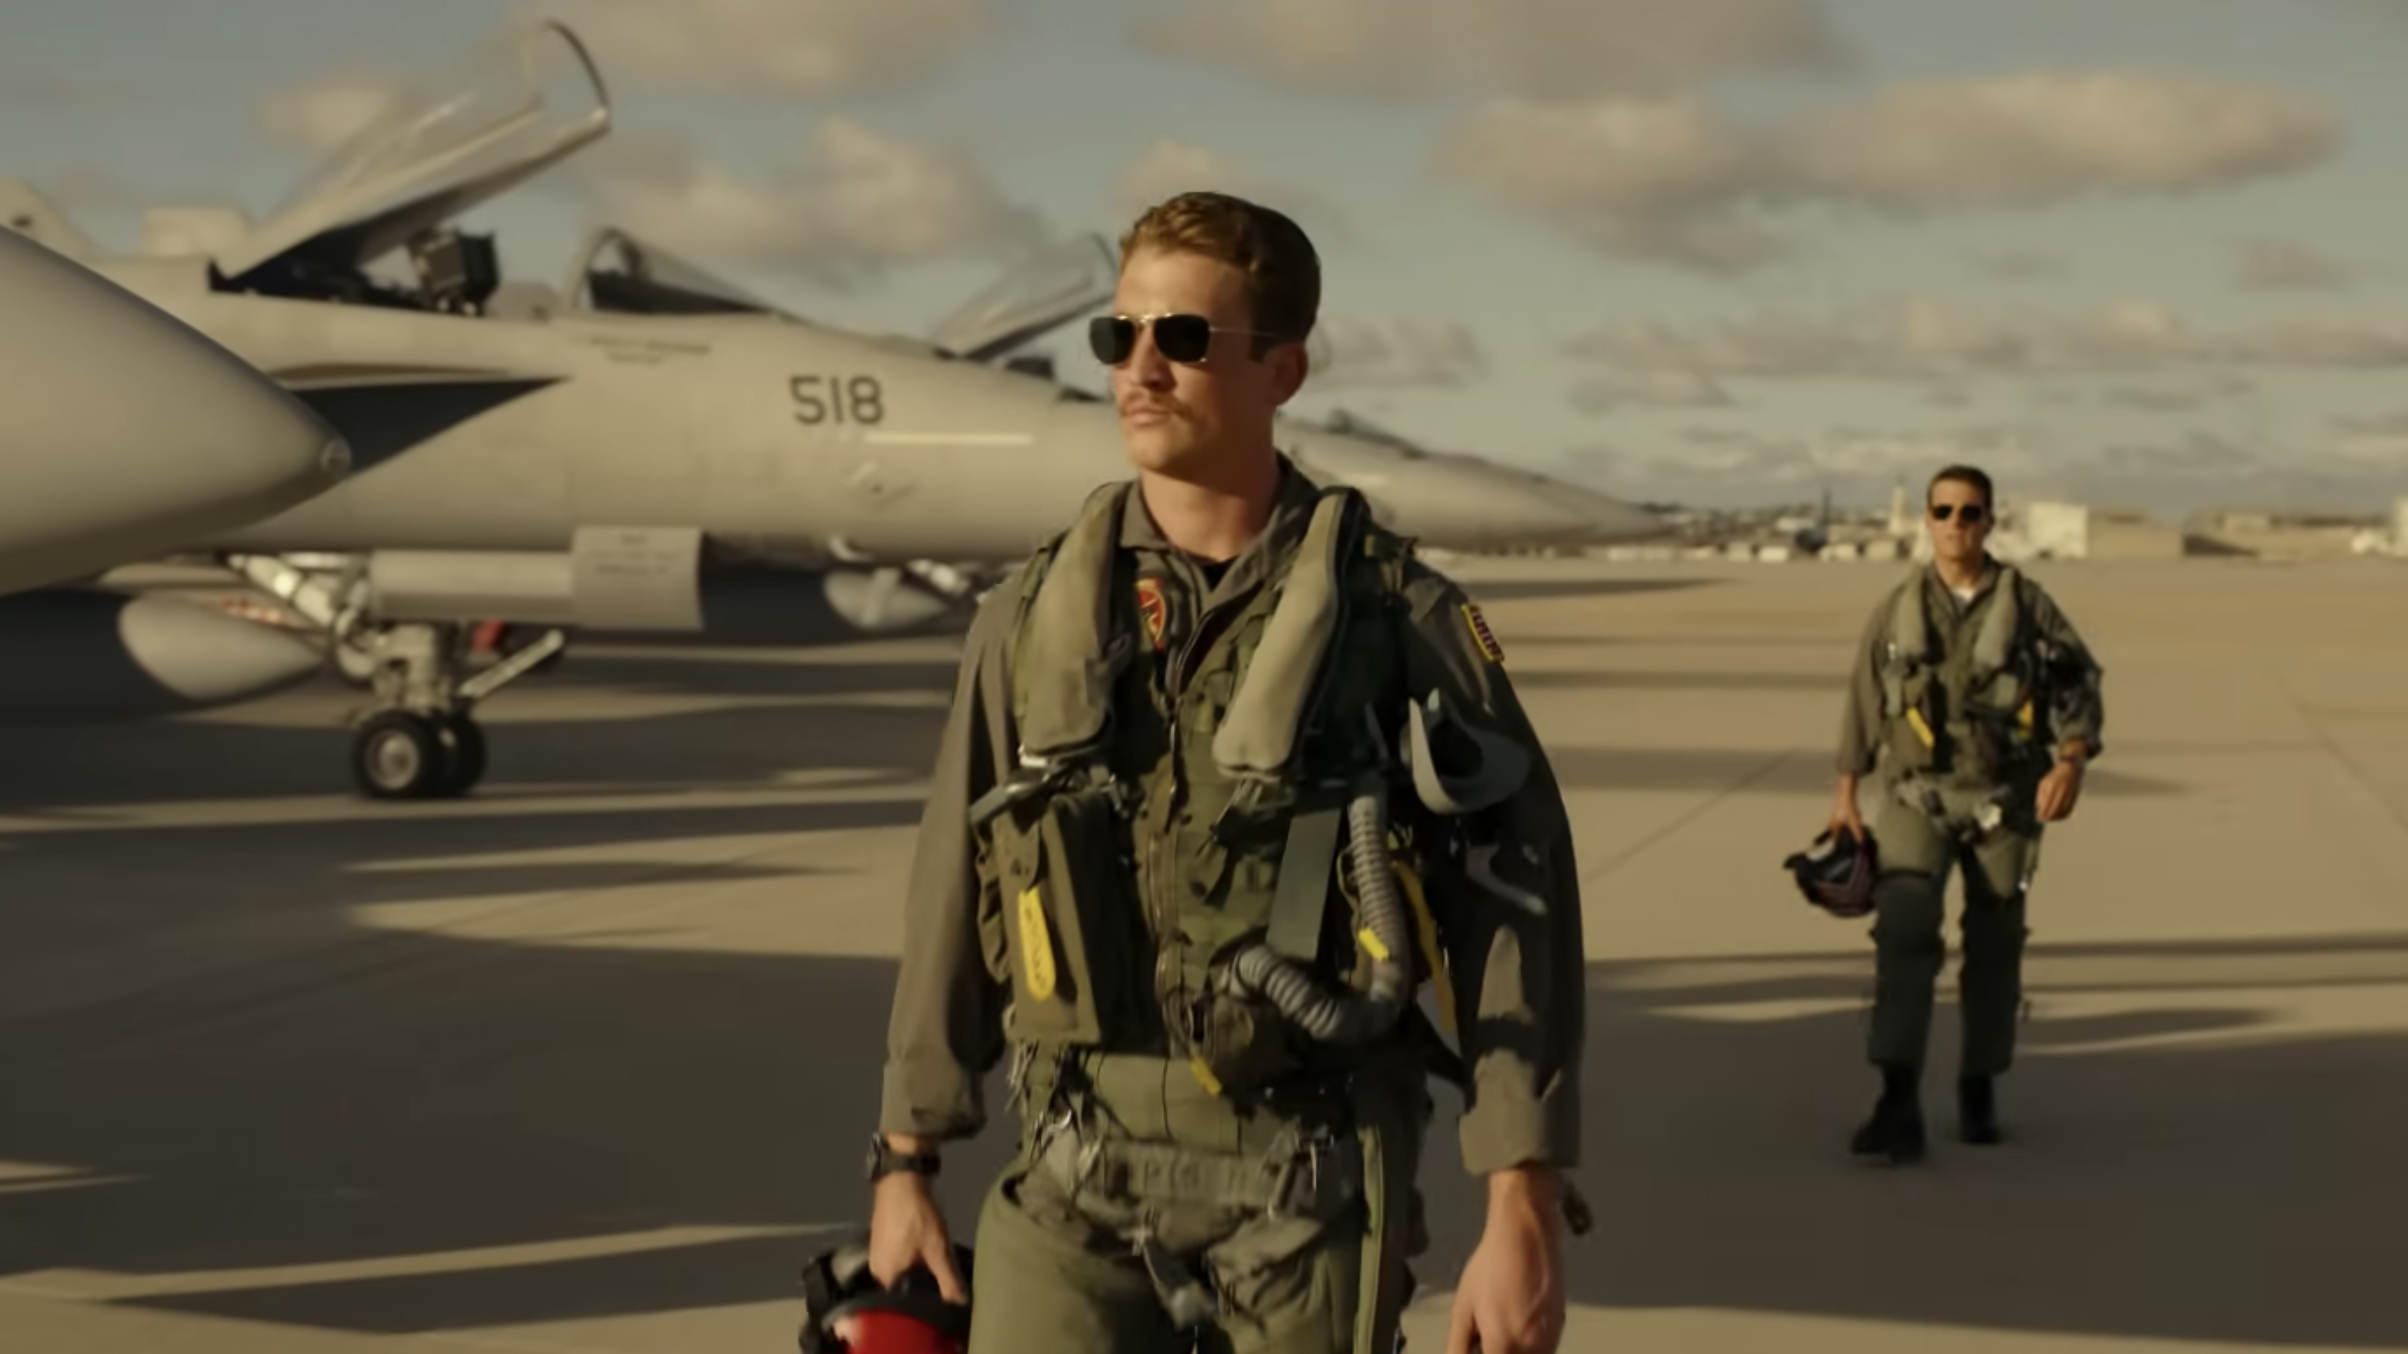 How to Watch and Where to Stream “Top Gun: Maverick”